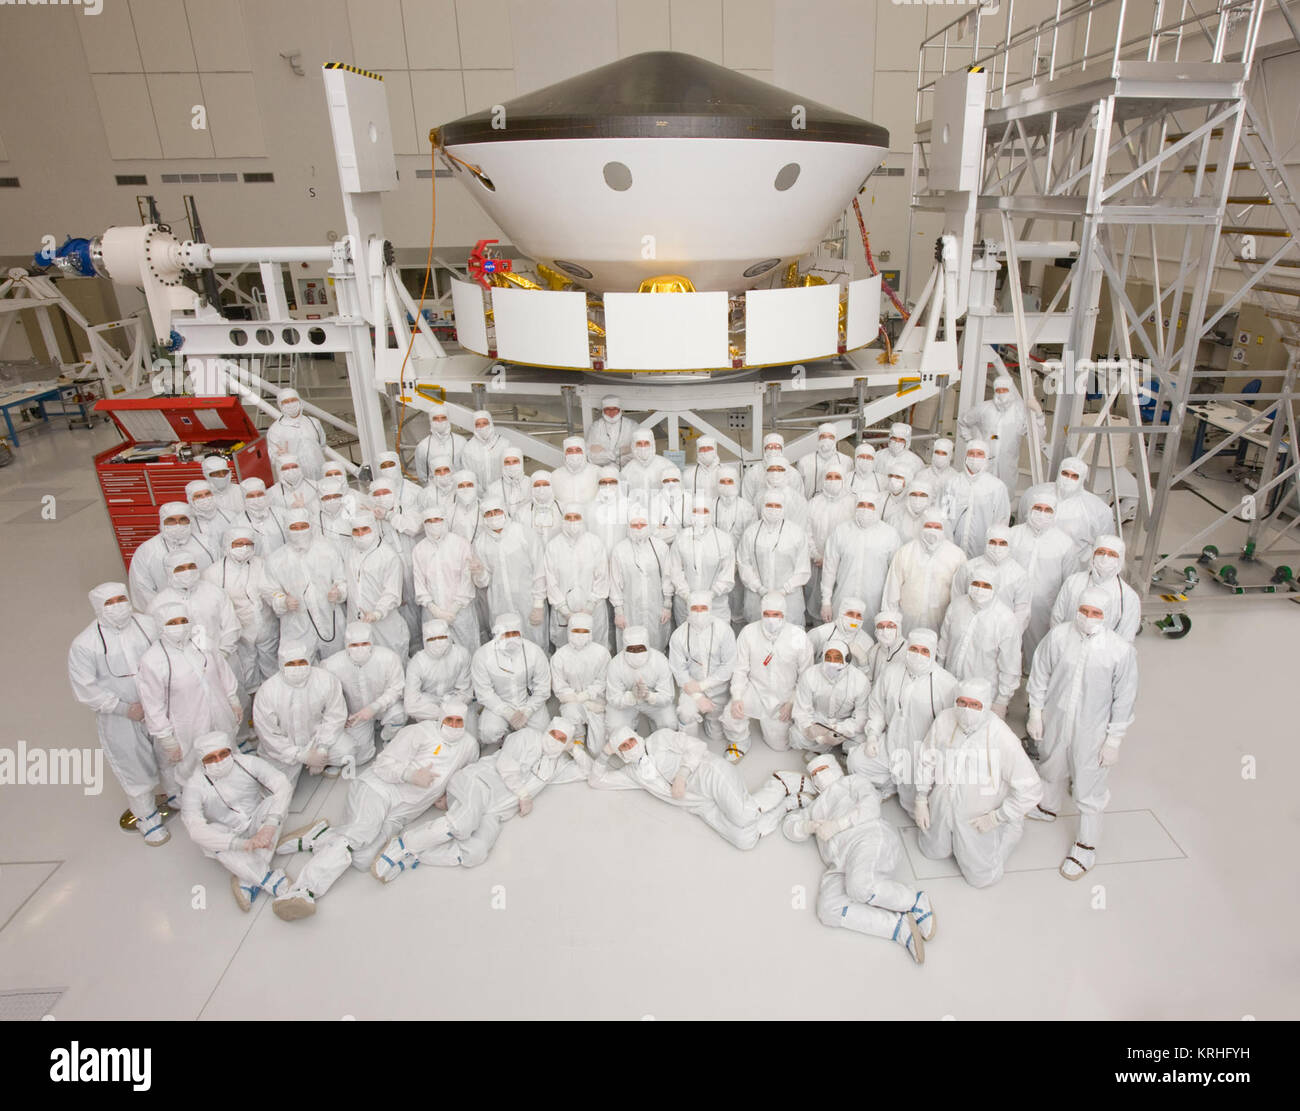 MSL ATLO Team Group Photo. 17 November/2008. Requester: David Gruel (102648) Photographer: T. Wynne Photolab order: 070914-107764 MSL spacecraft in JPL Spacecraft Assembly Facility with ATLO team members Stock Photo